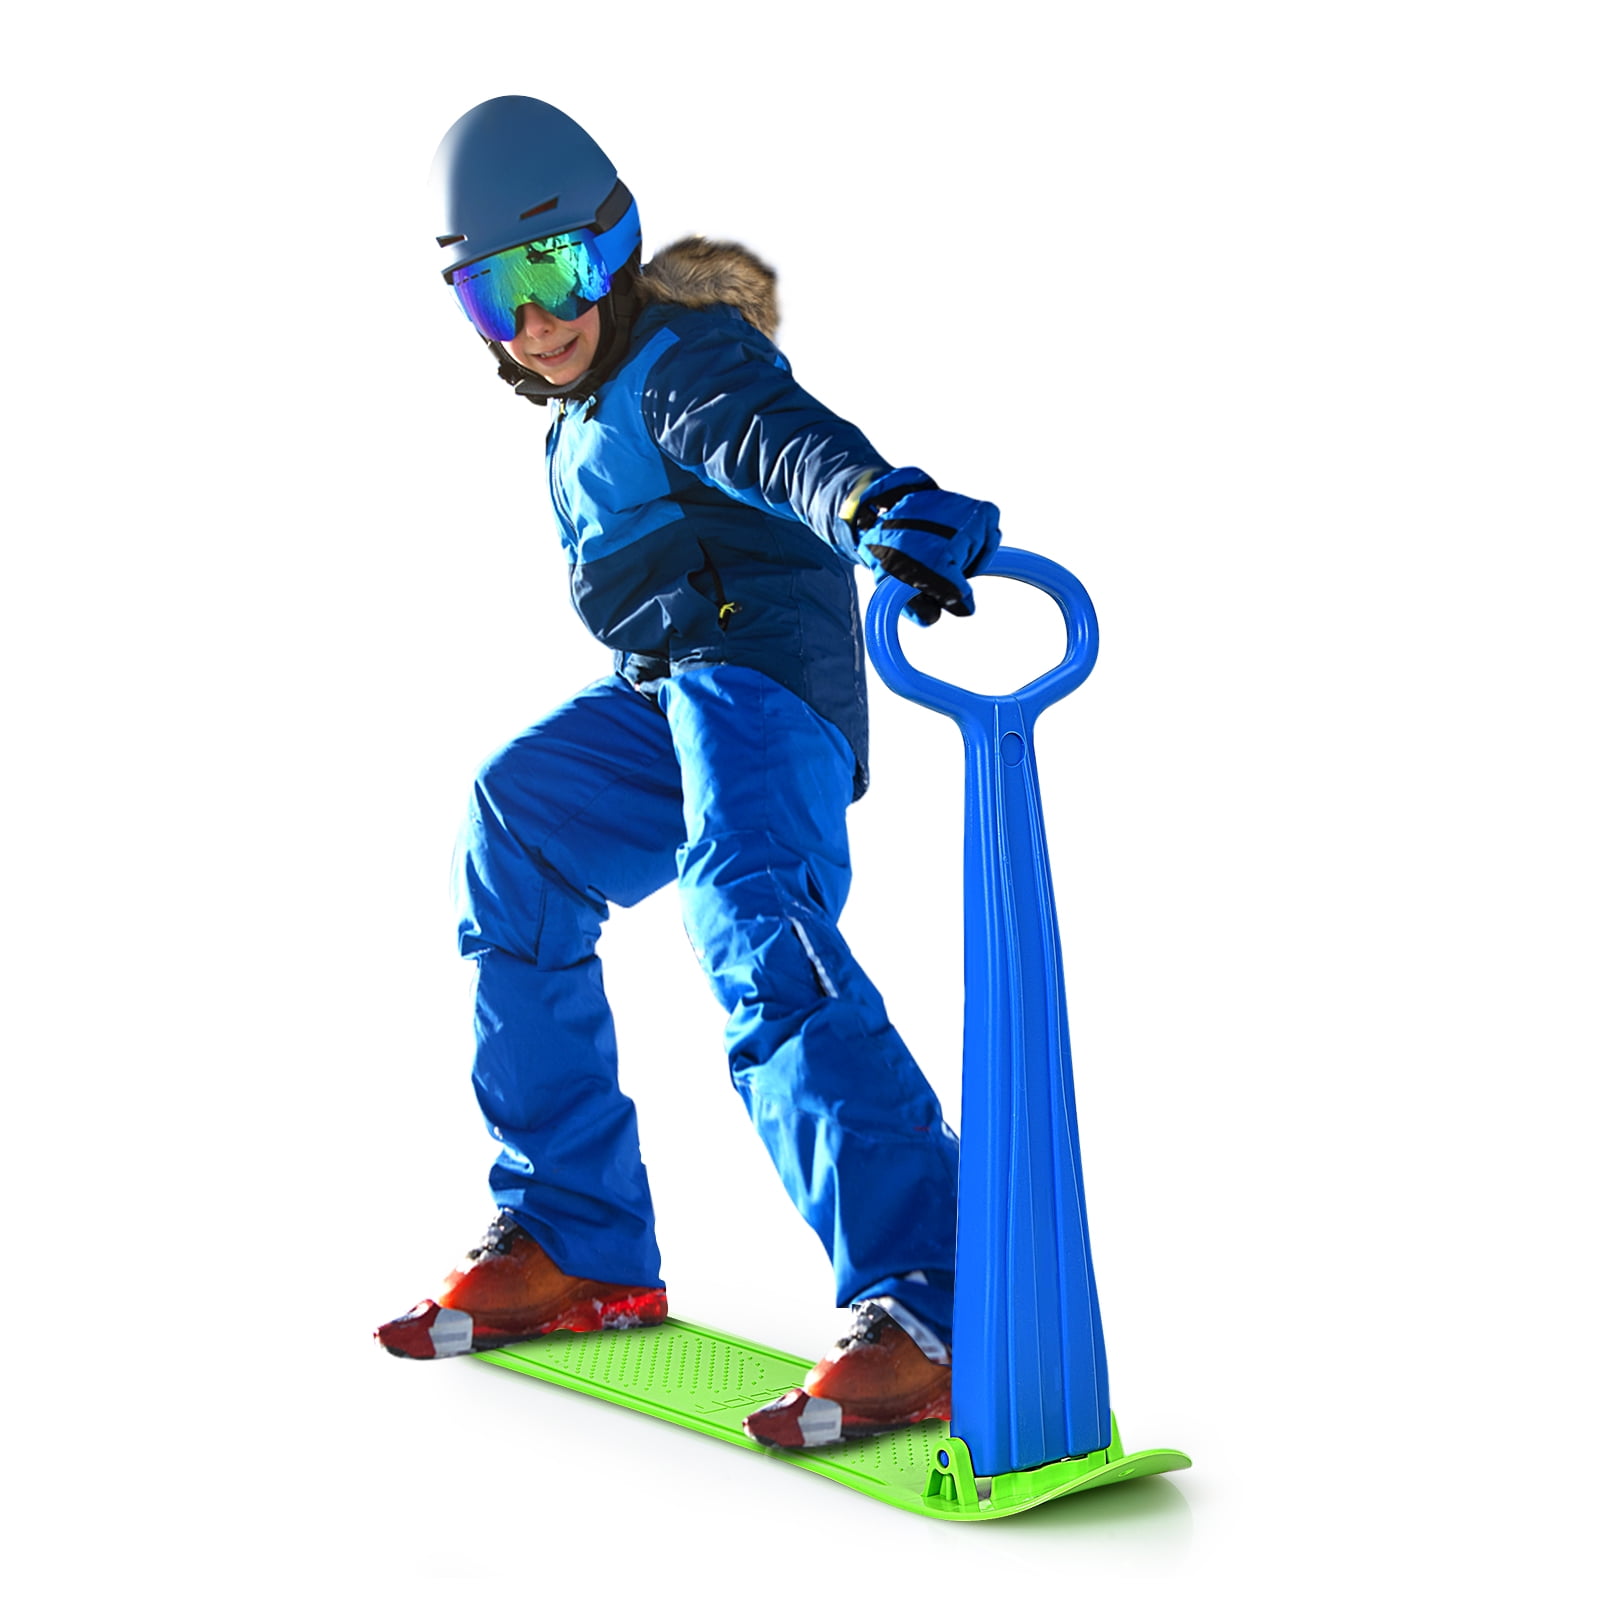 Color : Blue Fold-up Snowboard with Grip High Handlebar Snow Scooter for Use On Snow Grass Sand Downhill Sliding Ski Skooter for Kids and Adults